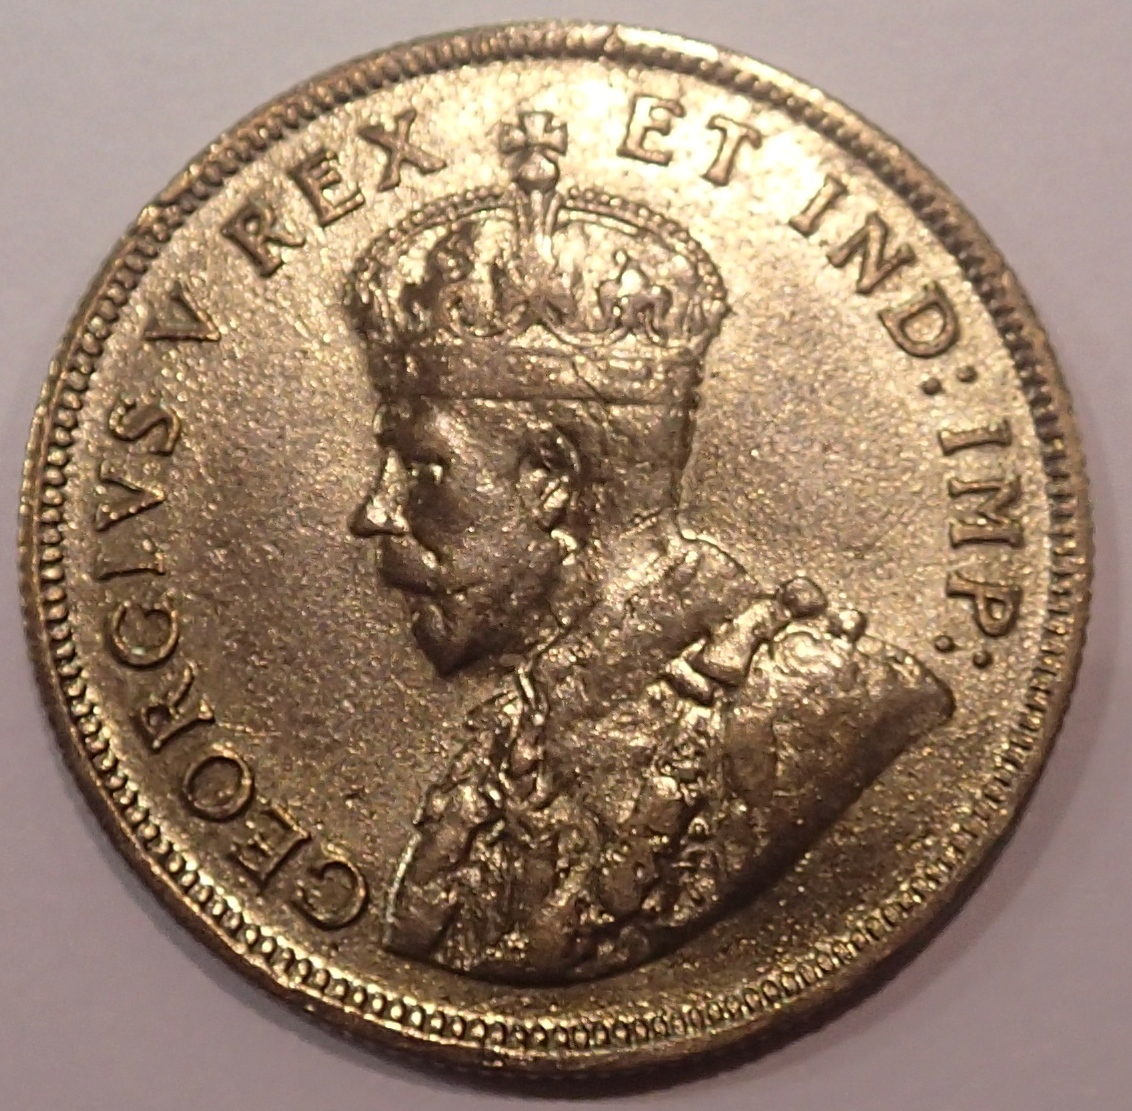 1924 - Silver East Africa Shilling of King George V. P&P Group 1 (£14+VAT for the first lot and £1+